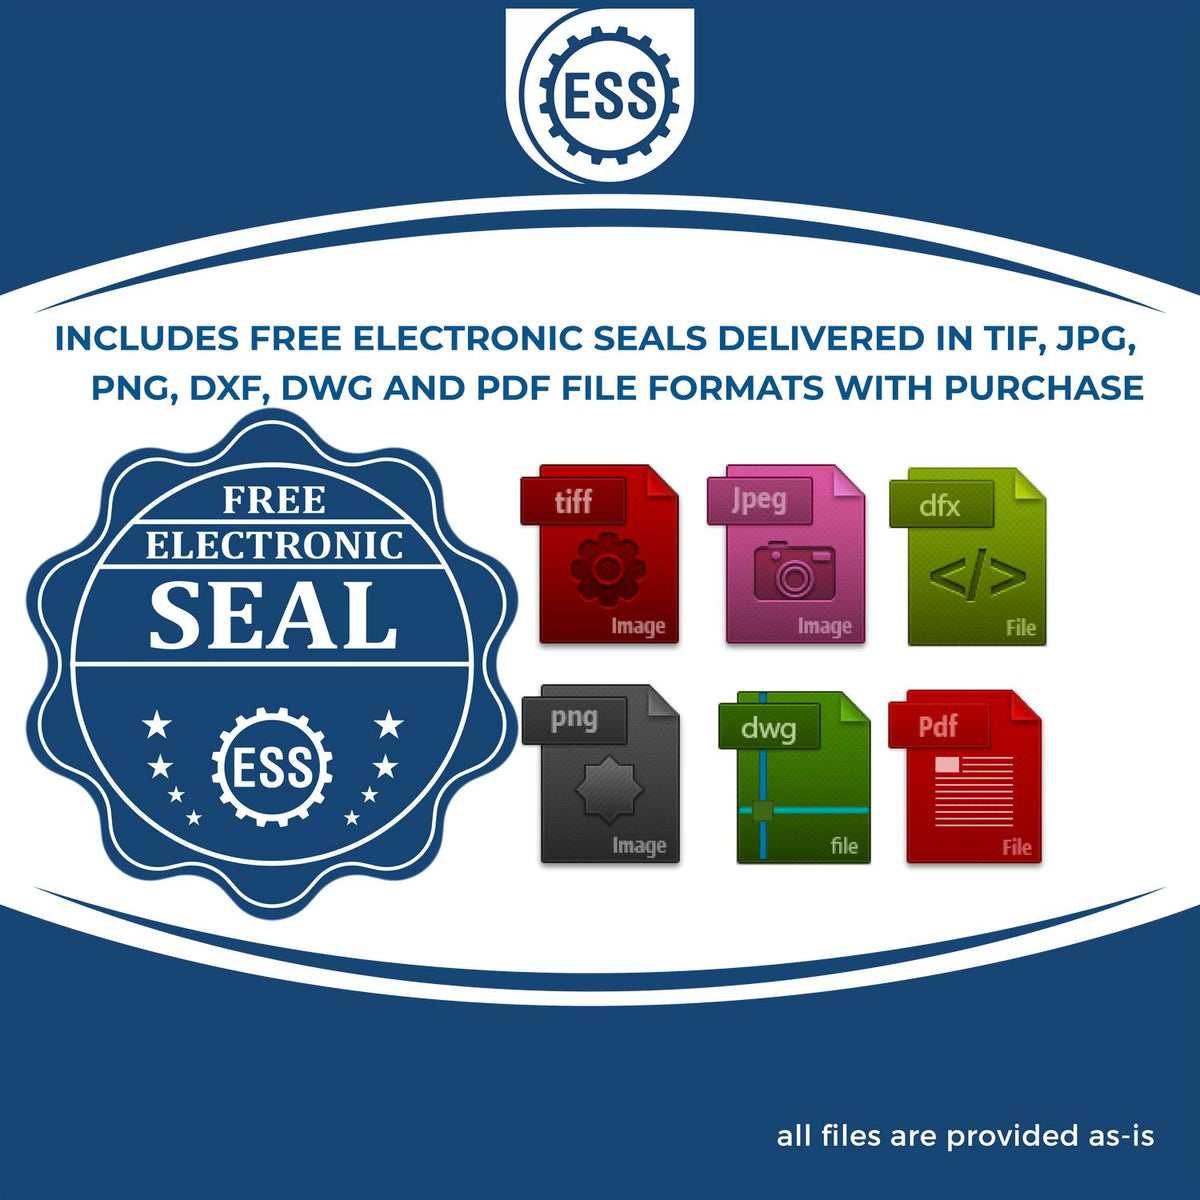 An infographic for the free electronic seal for the Heavy Duty Cast Iron Nevada Geologist Seal Embosser illustrating the different file type icons such as DXF, DWG, TIF, JPG and PNG.